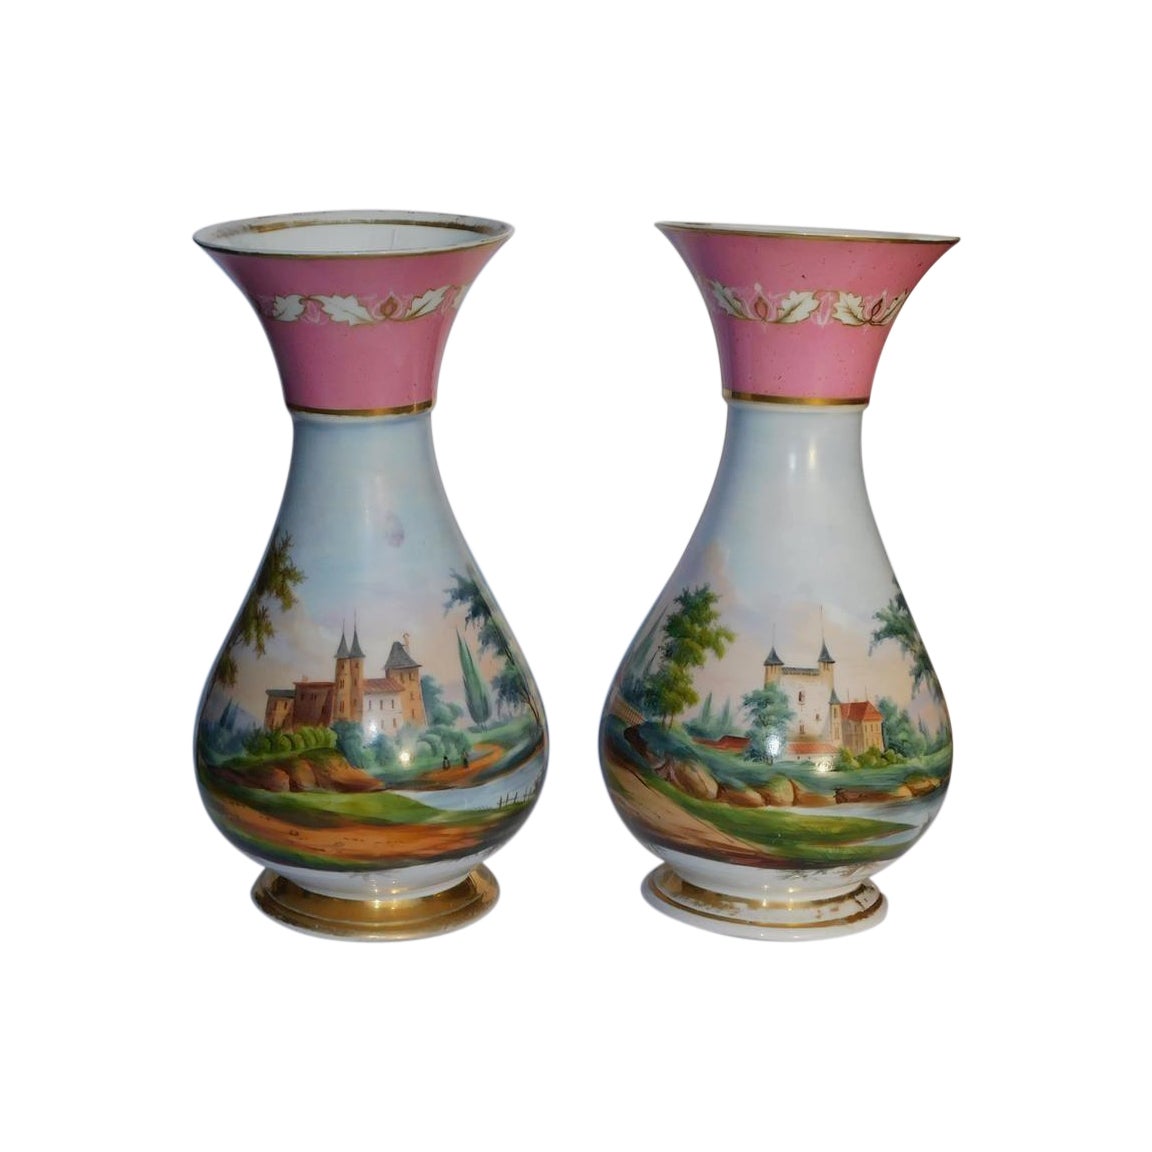 Pair of French Old Pairs Painted Porcelain Vases with Scenic Landscapes, C. 1840 For Sale